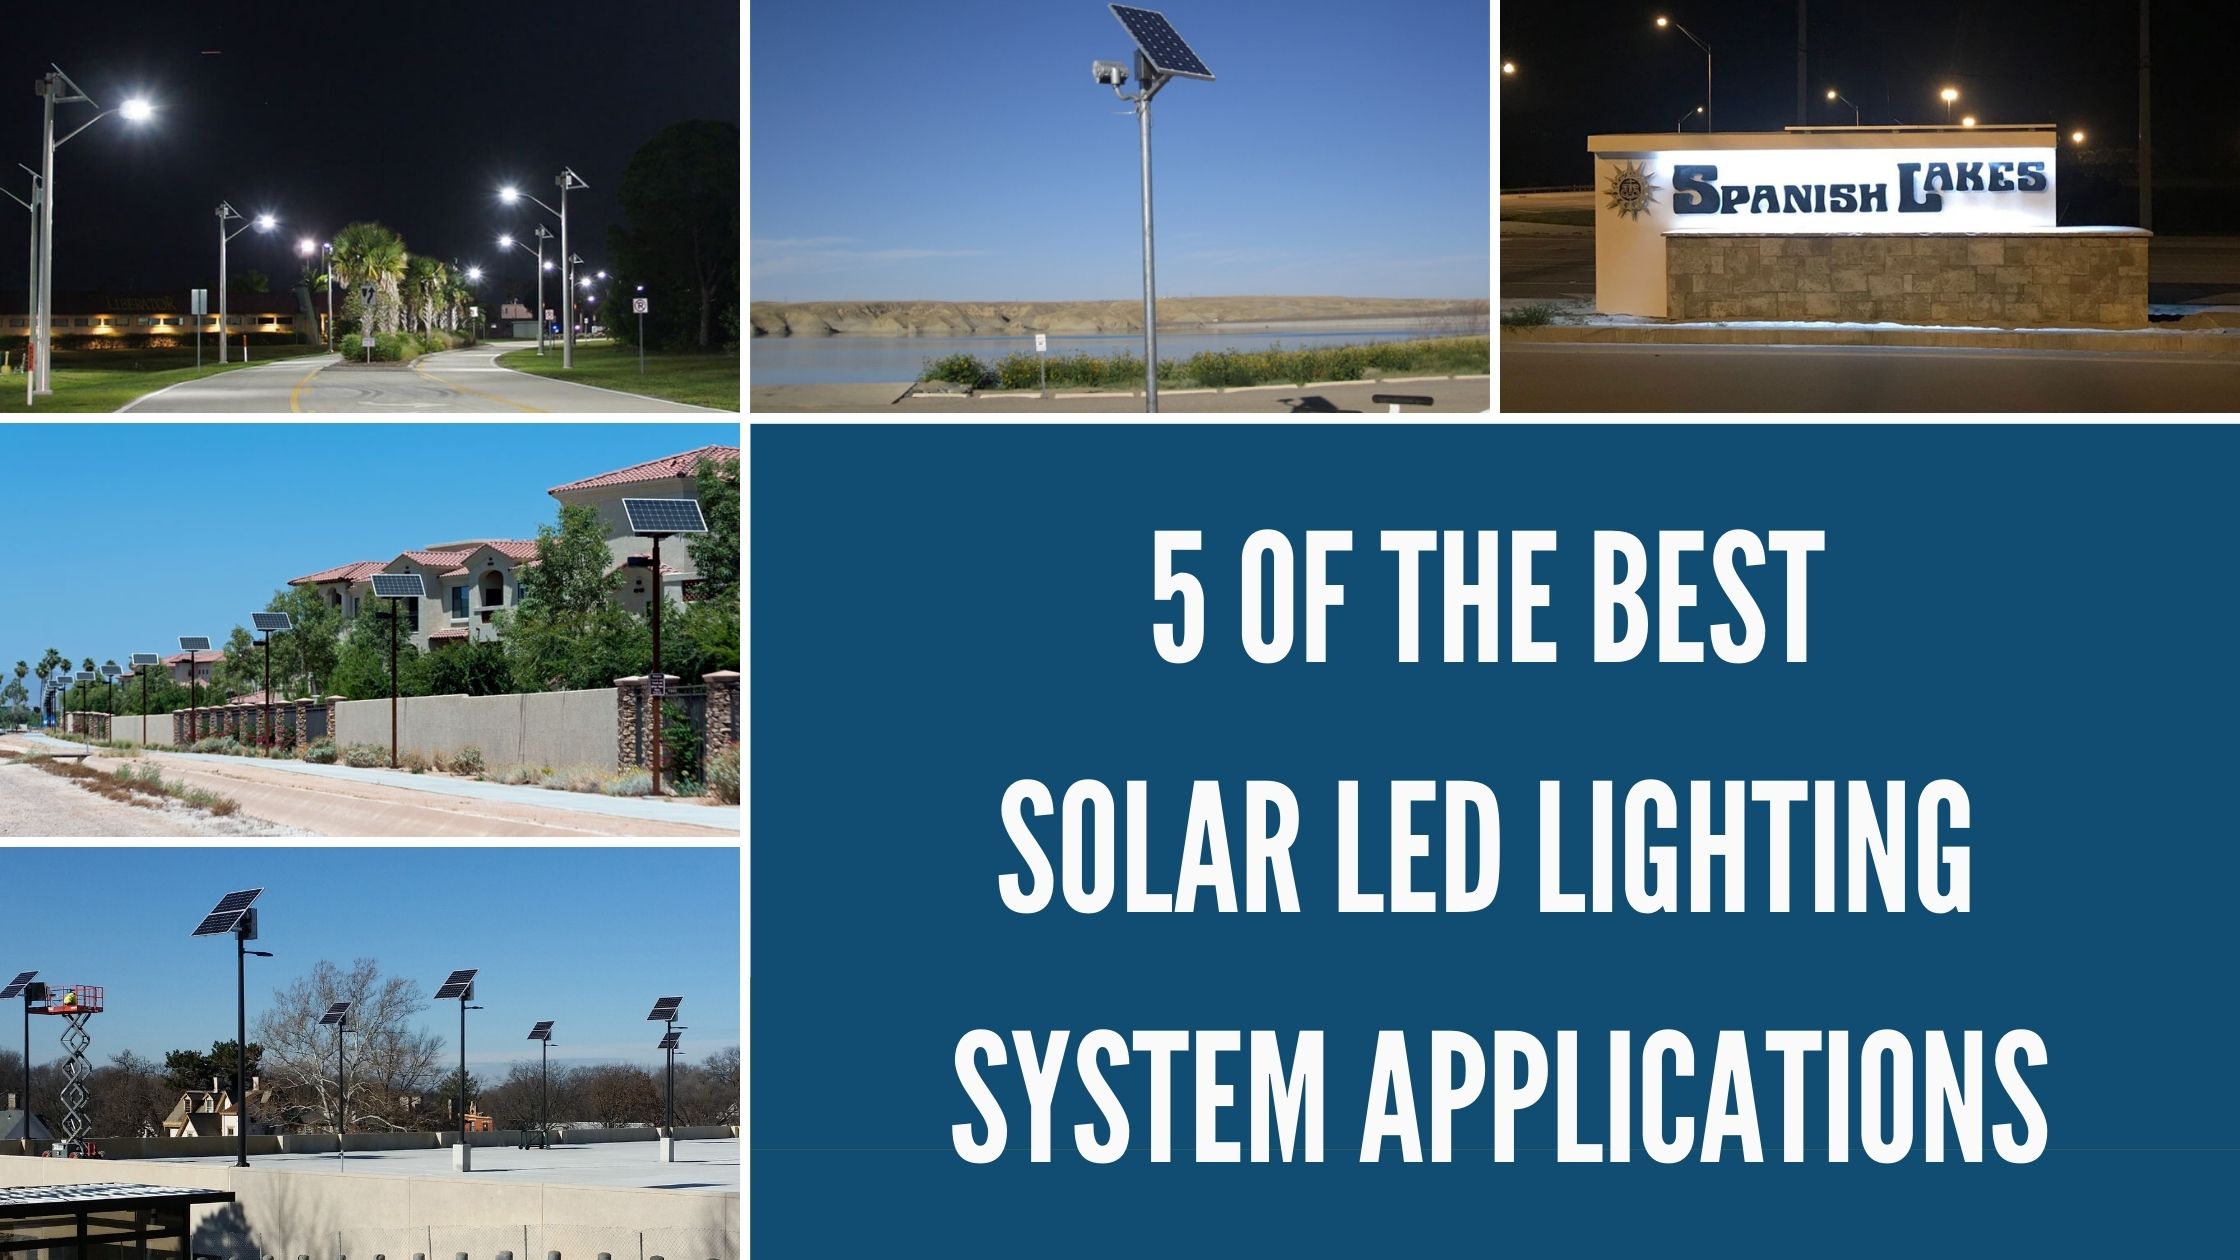 5 of the Best Solar LED Lighting System Applications